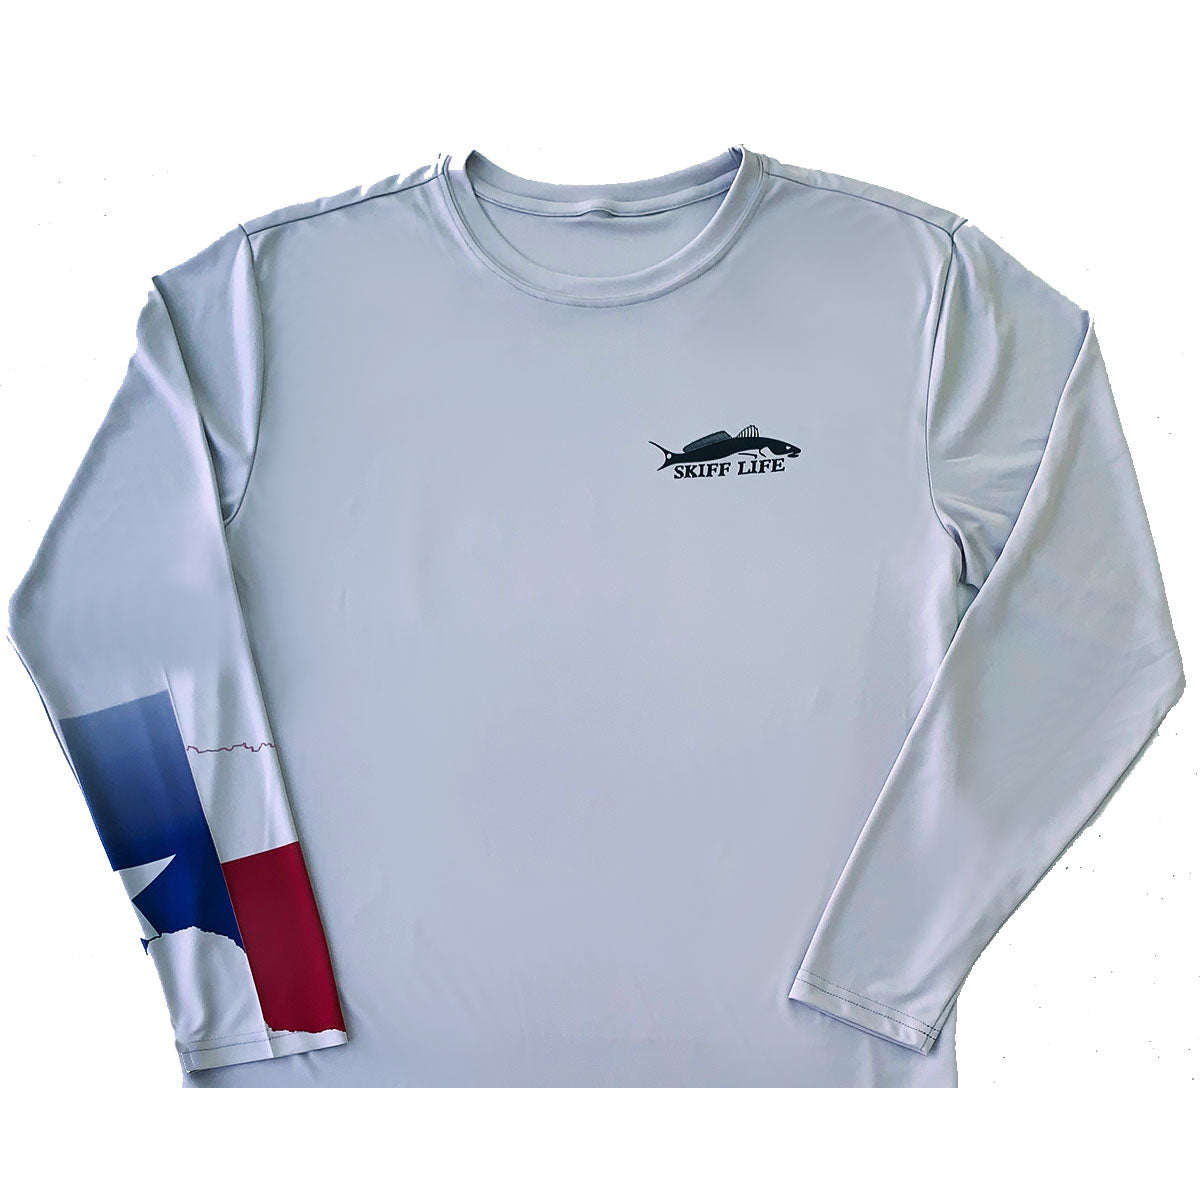 Texas Red Spec Fishing Shirt Texas State Flag with Optional Flag Sleeve - Skiff Life